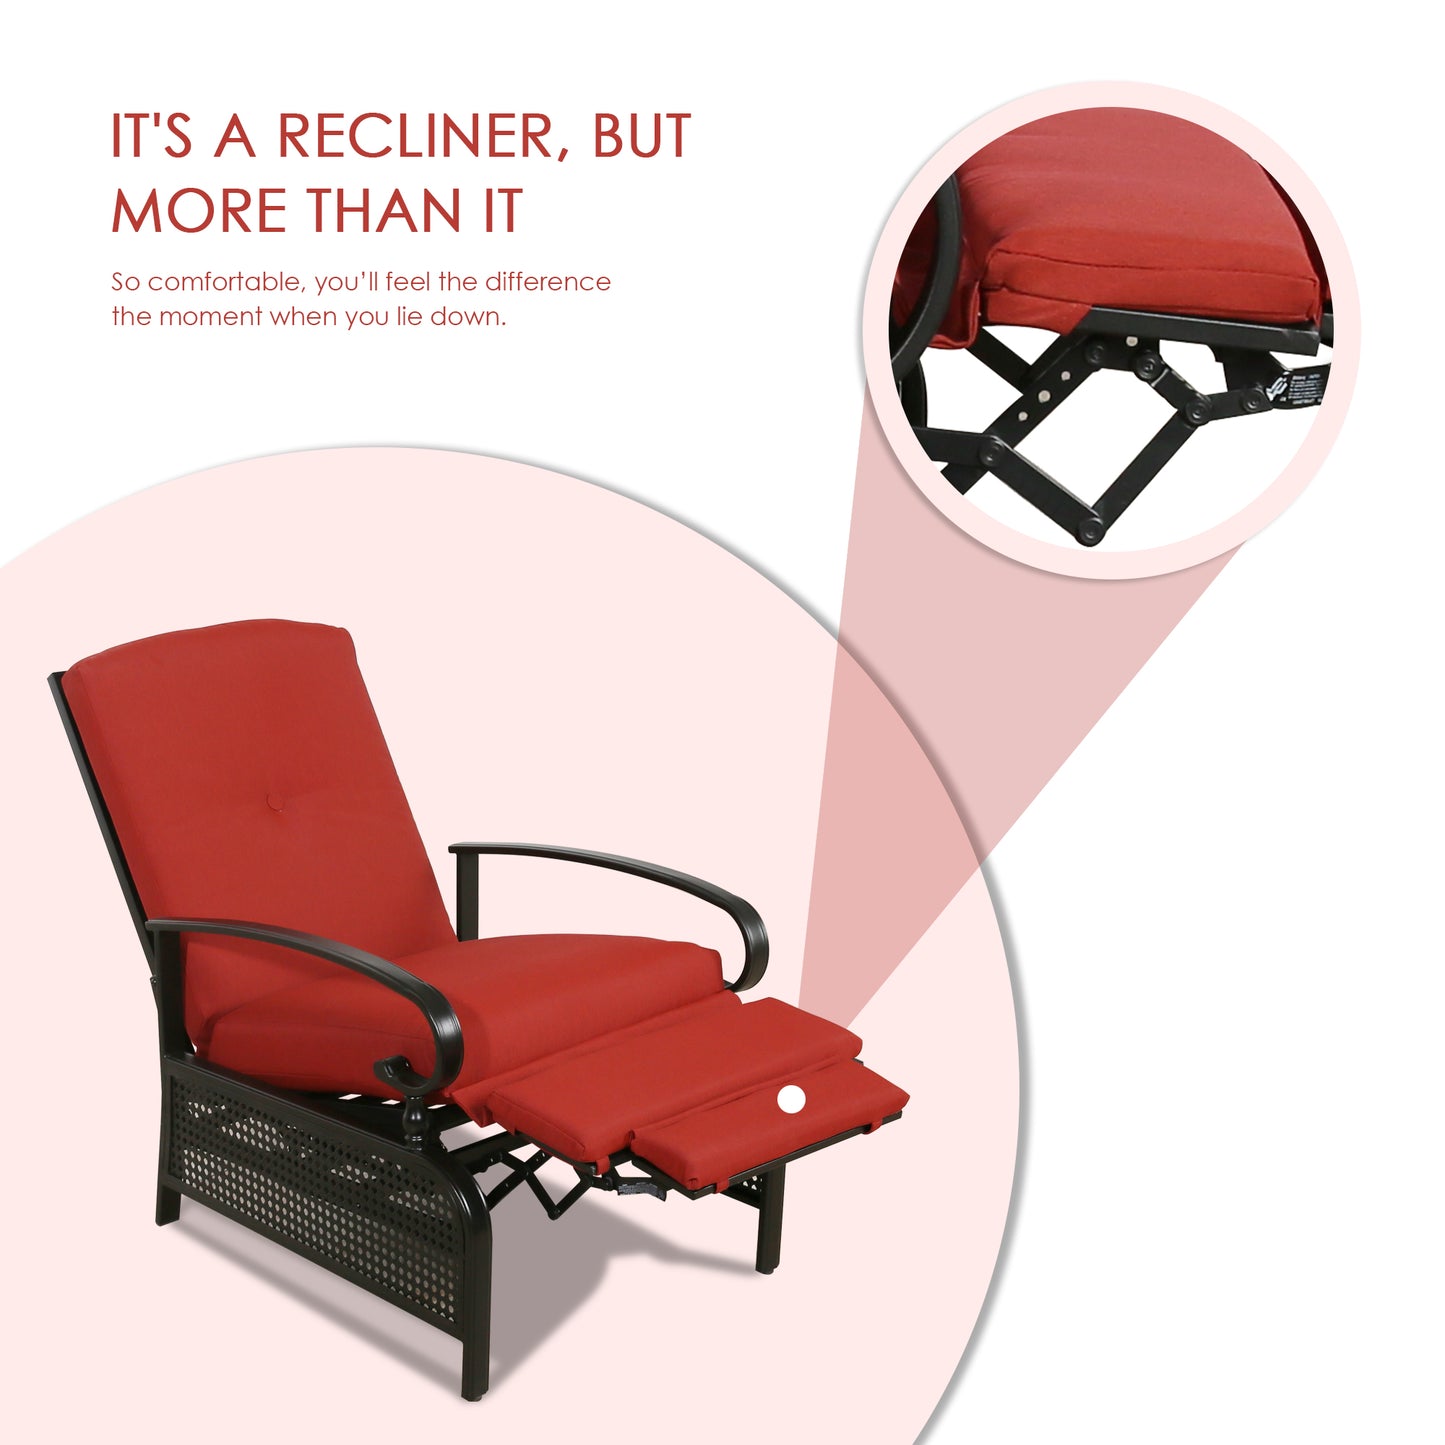 Patio Recliner Chair Automatic Adjustable Back Outdoor Lounge Chair with 100% Olefin Cushion (Red)